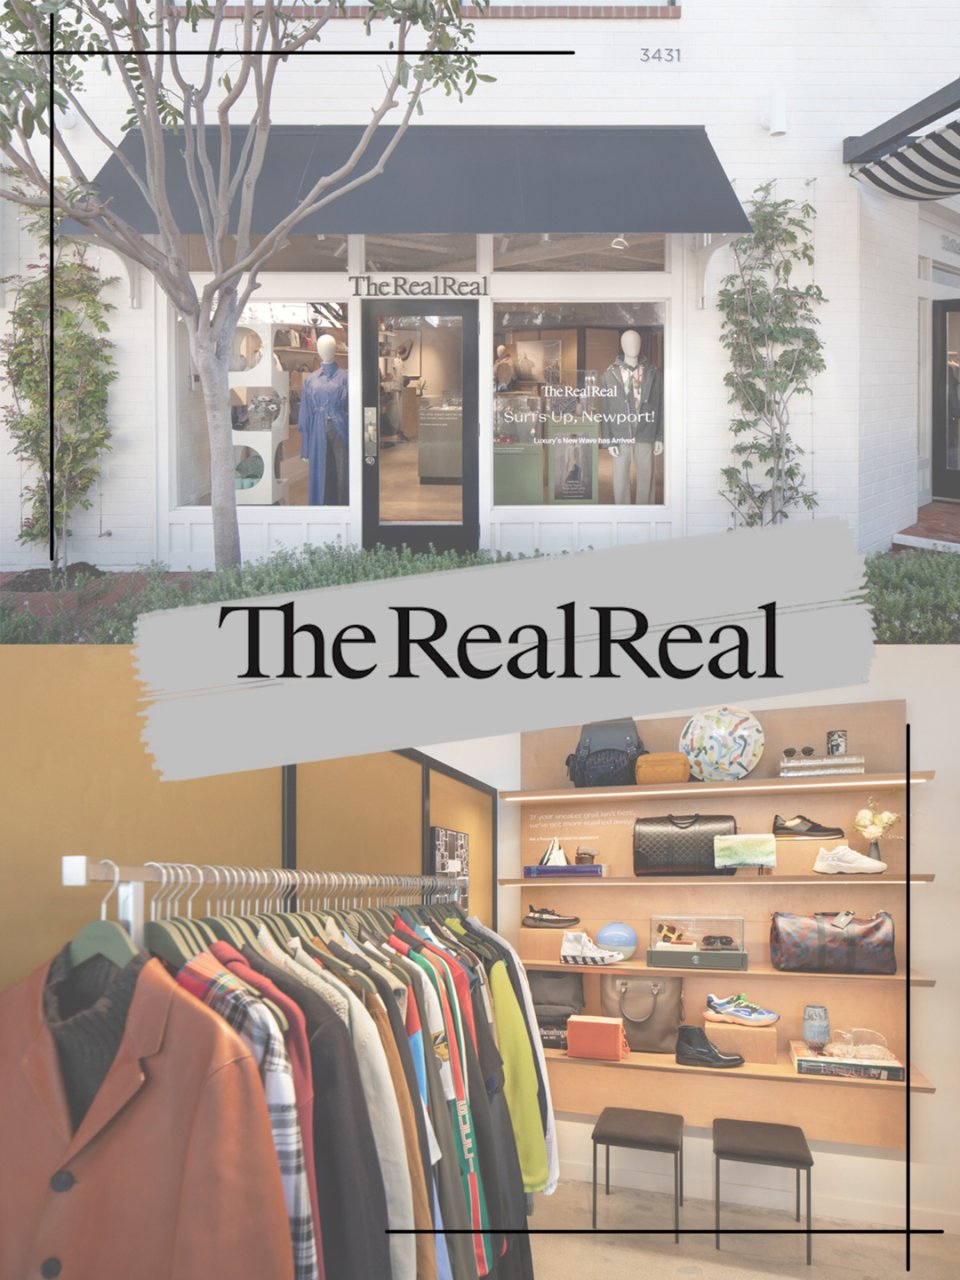 TheRealReal在加州开新店！逛街...